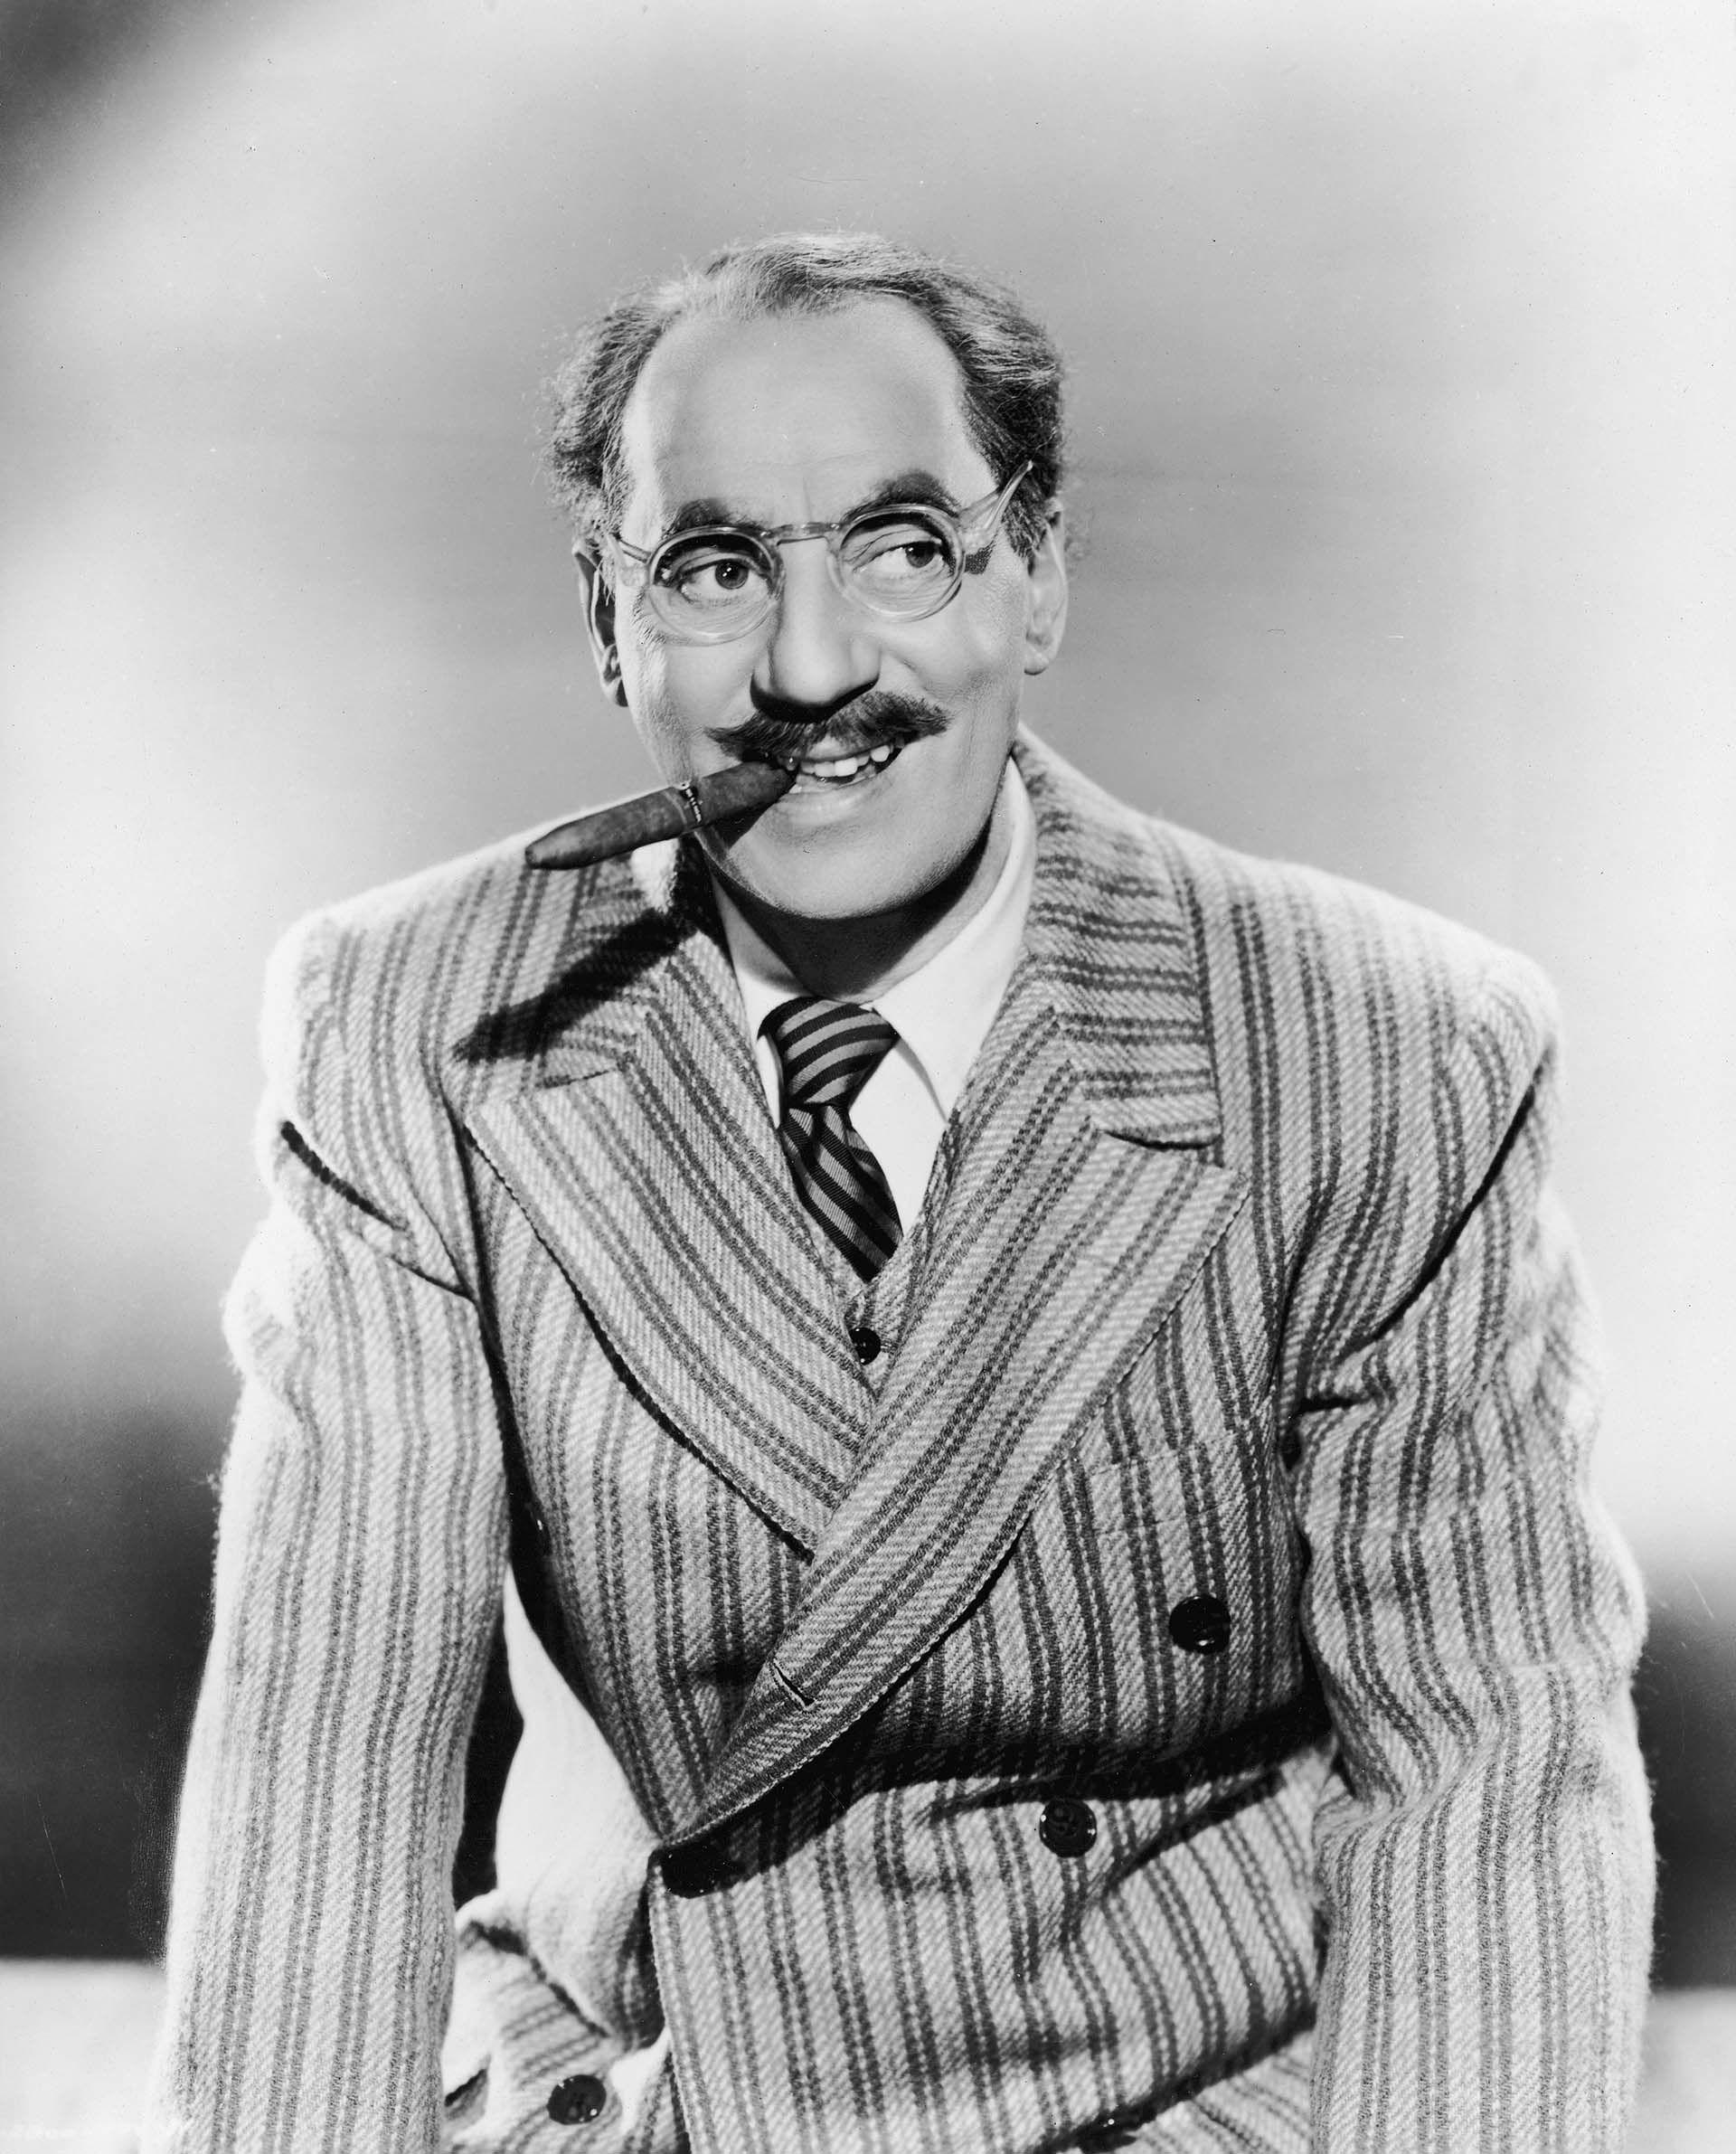 Groucho Marx, with his characteristic cigar but without the makeup mustache, in 1945 (Photo by Pictorial Parade/Getty Images)